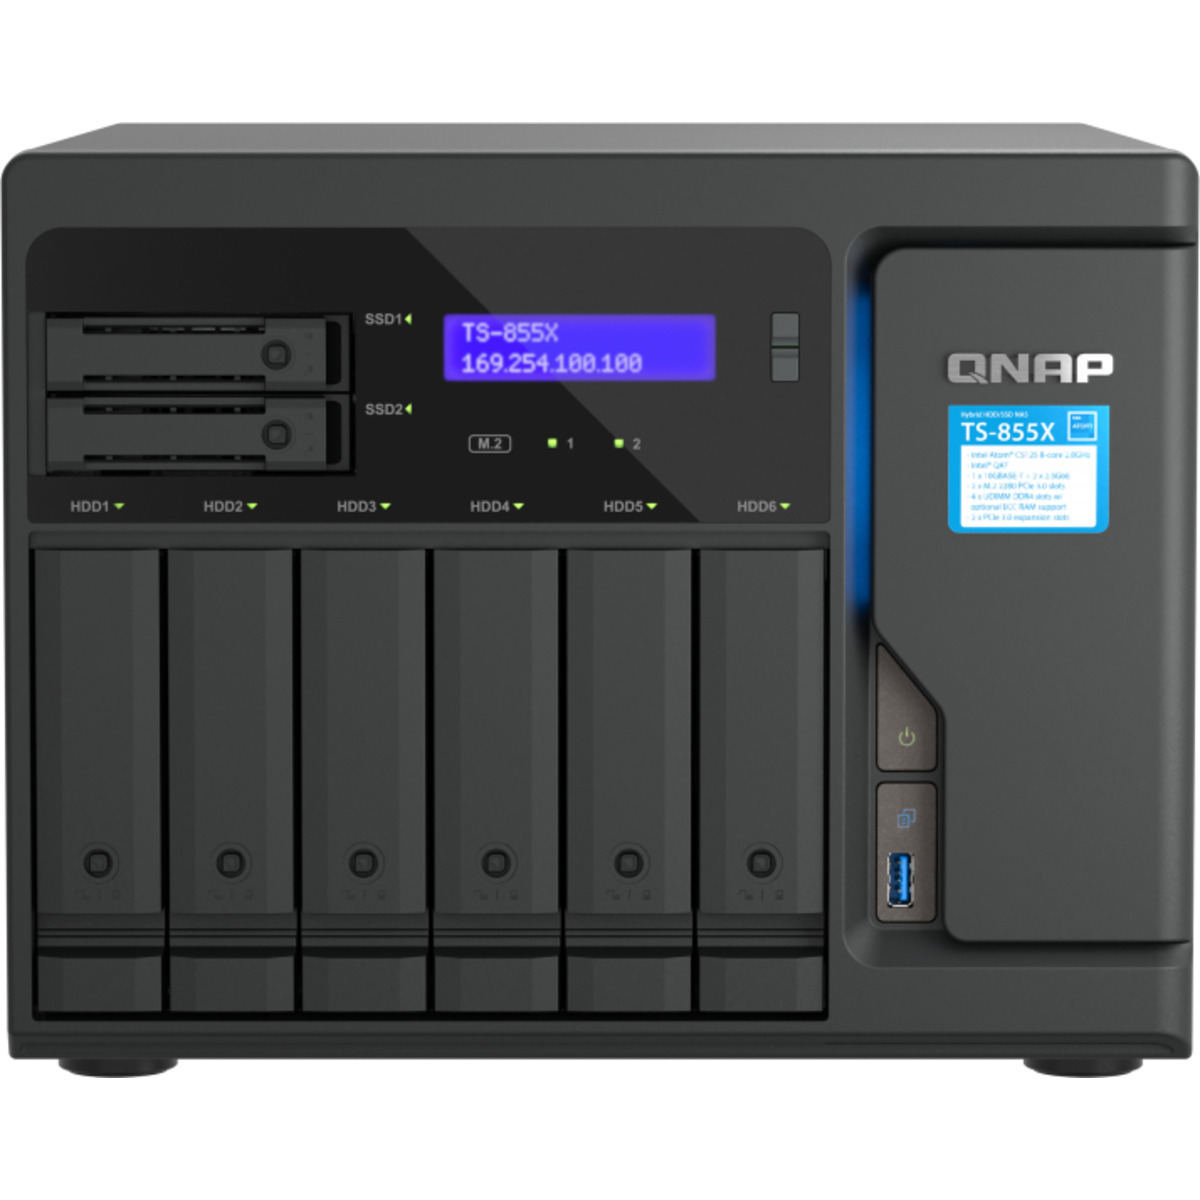 buy $3632 QNAP TS-855X 72tb Desktop NAS - Network Attached Storage Device 6x12000gb Seagate IronWolf Pro ST12000NT001 3.5 7200rpm SATA 6Gb/s HDD NAS Class Drives Installed - Burn-In Tested - FREE RAM UPGRADE - nas headquarters buy network attached storage server device das new raid-5 free shipping simply usa TS-855X